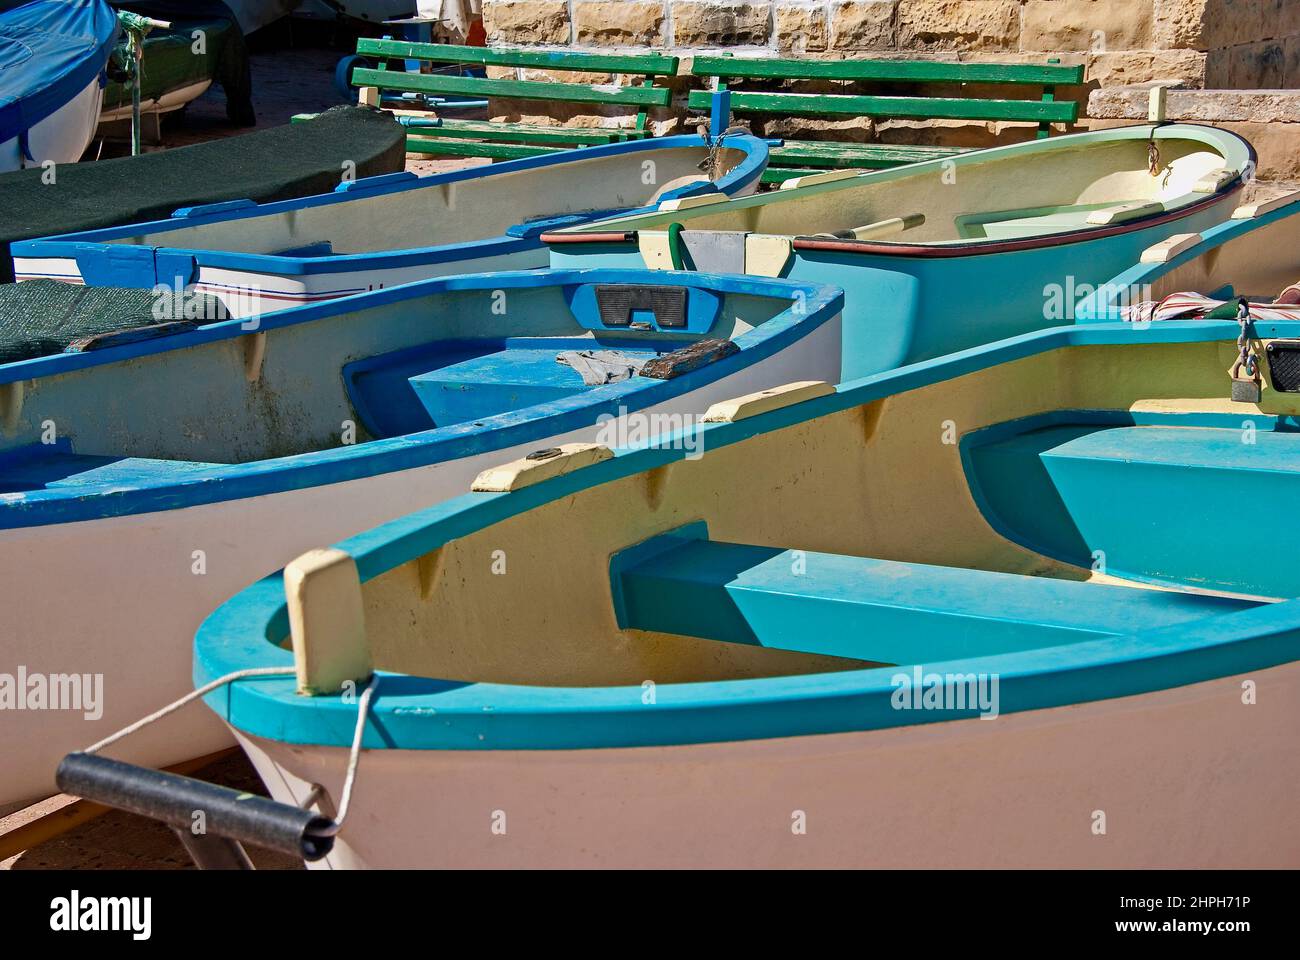 Small rowing boats for hire in a harbor on the island Malta. Stock Photo